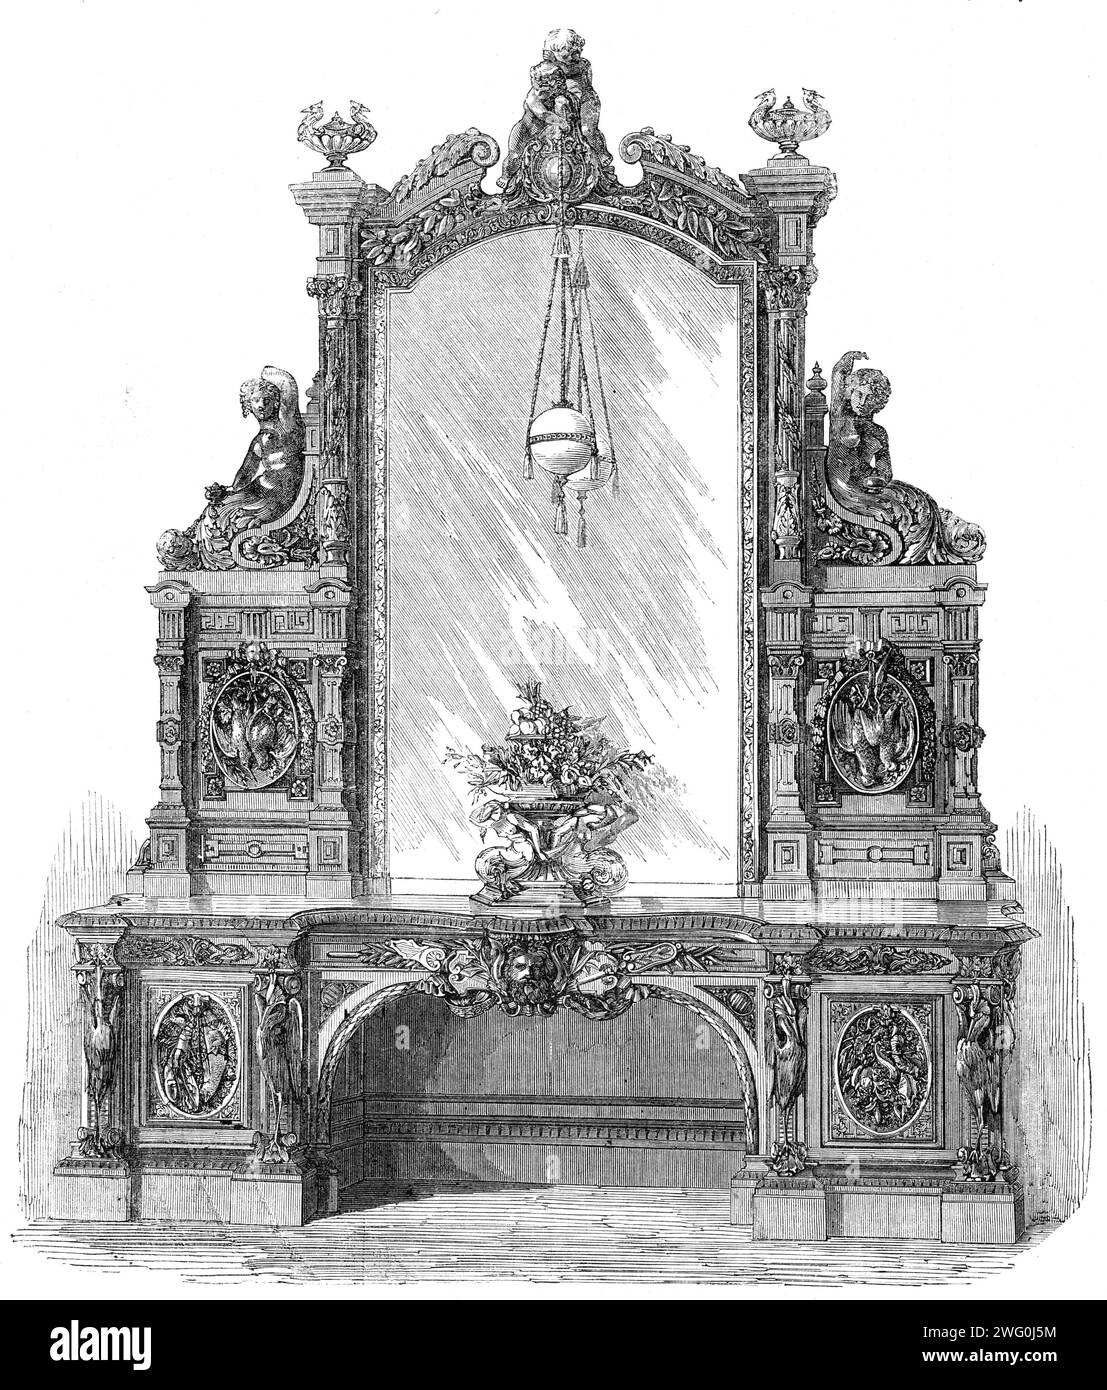 The International Exhibition: sideboard by Gillow, 1862. 'This walnut sideboard is remarkable for...the delicate and yet masterly workmanship displayed in the execution of the details. The design was originated and worked out in the establishment of Messrs. Gillow, of Oxford-street, a house long known as one of the very first in point of taste among cabinetmakers and upholsterers and as one of the oldest established firms in the kingdom. This beautiful piece of furniture...is about 12ft. in height and in the style of the Renaissance...it is at the same time so cunningly decorated with objects Stock Photo